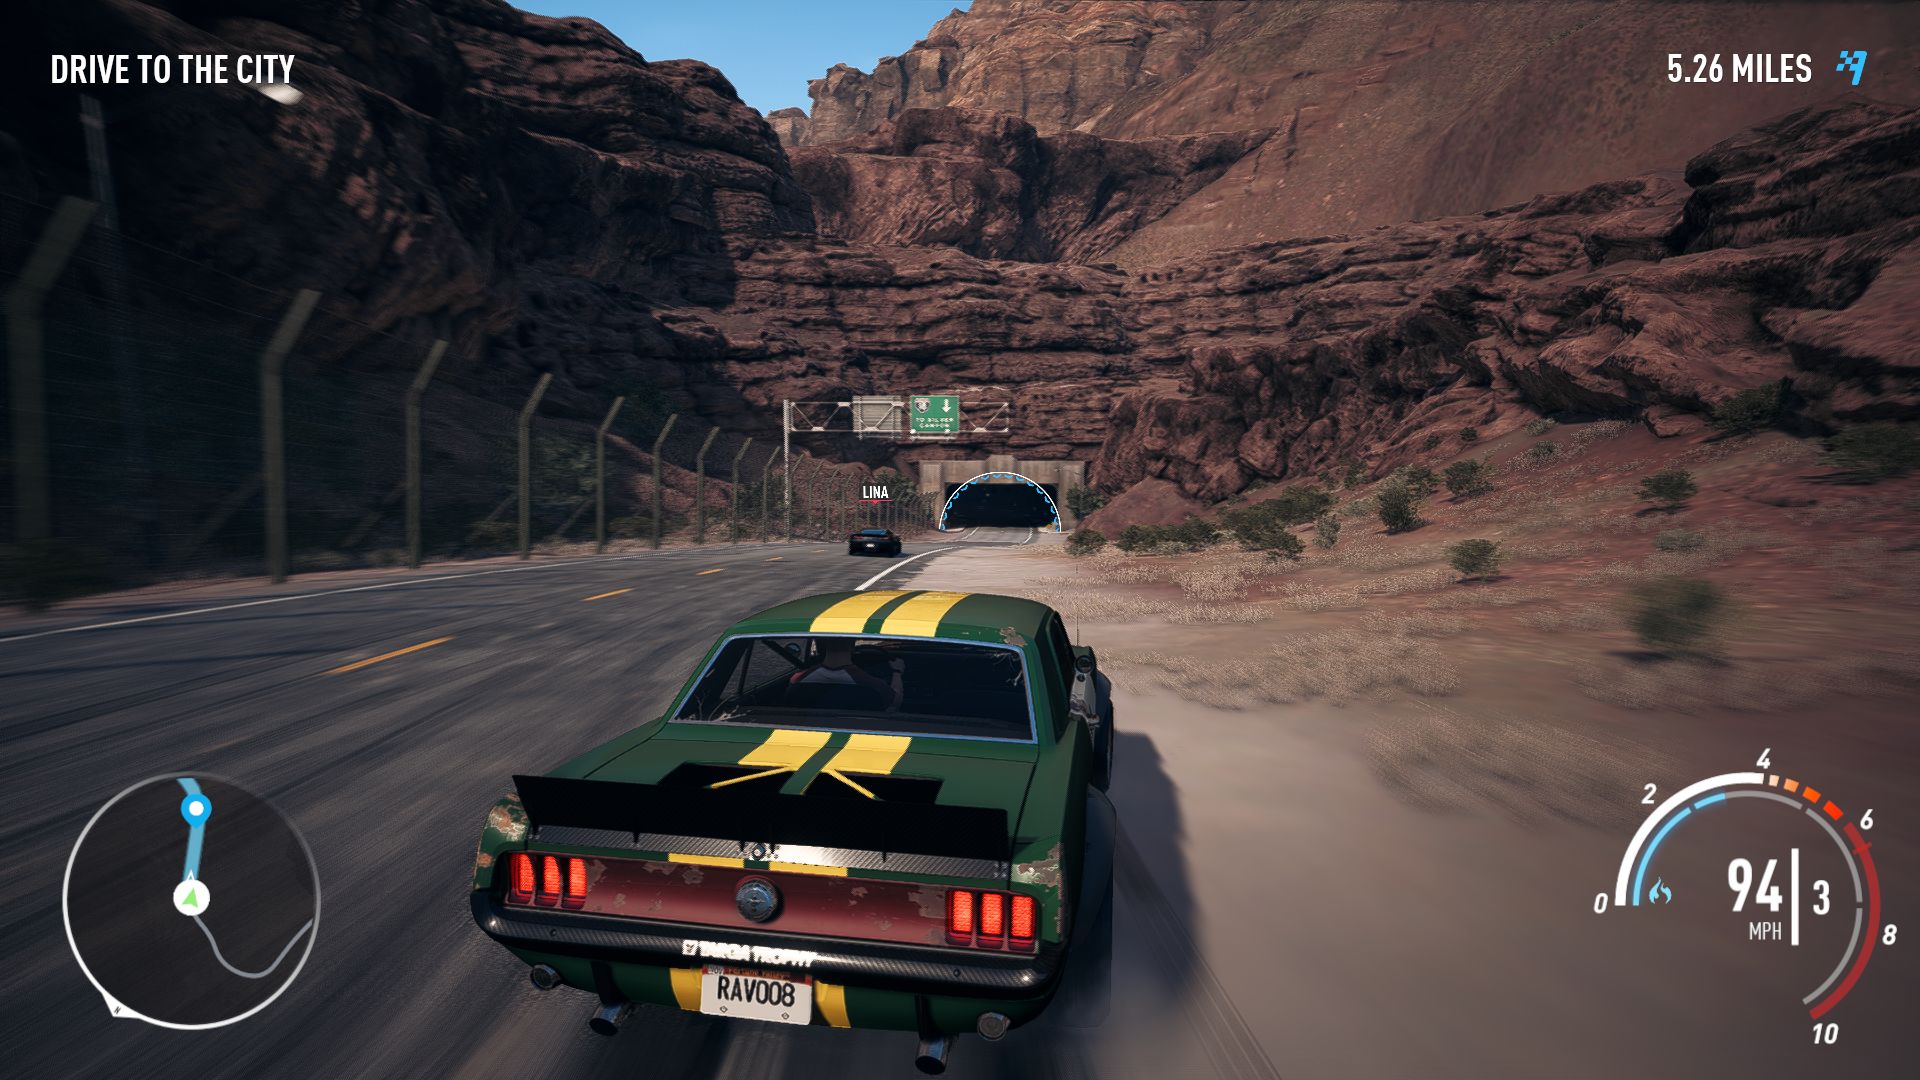 need speed payback pc